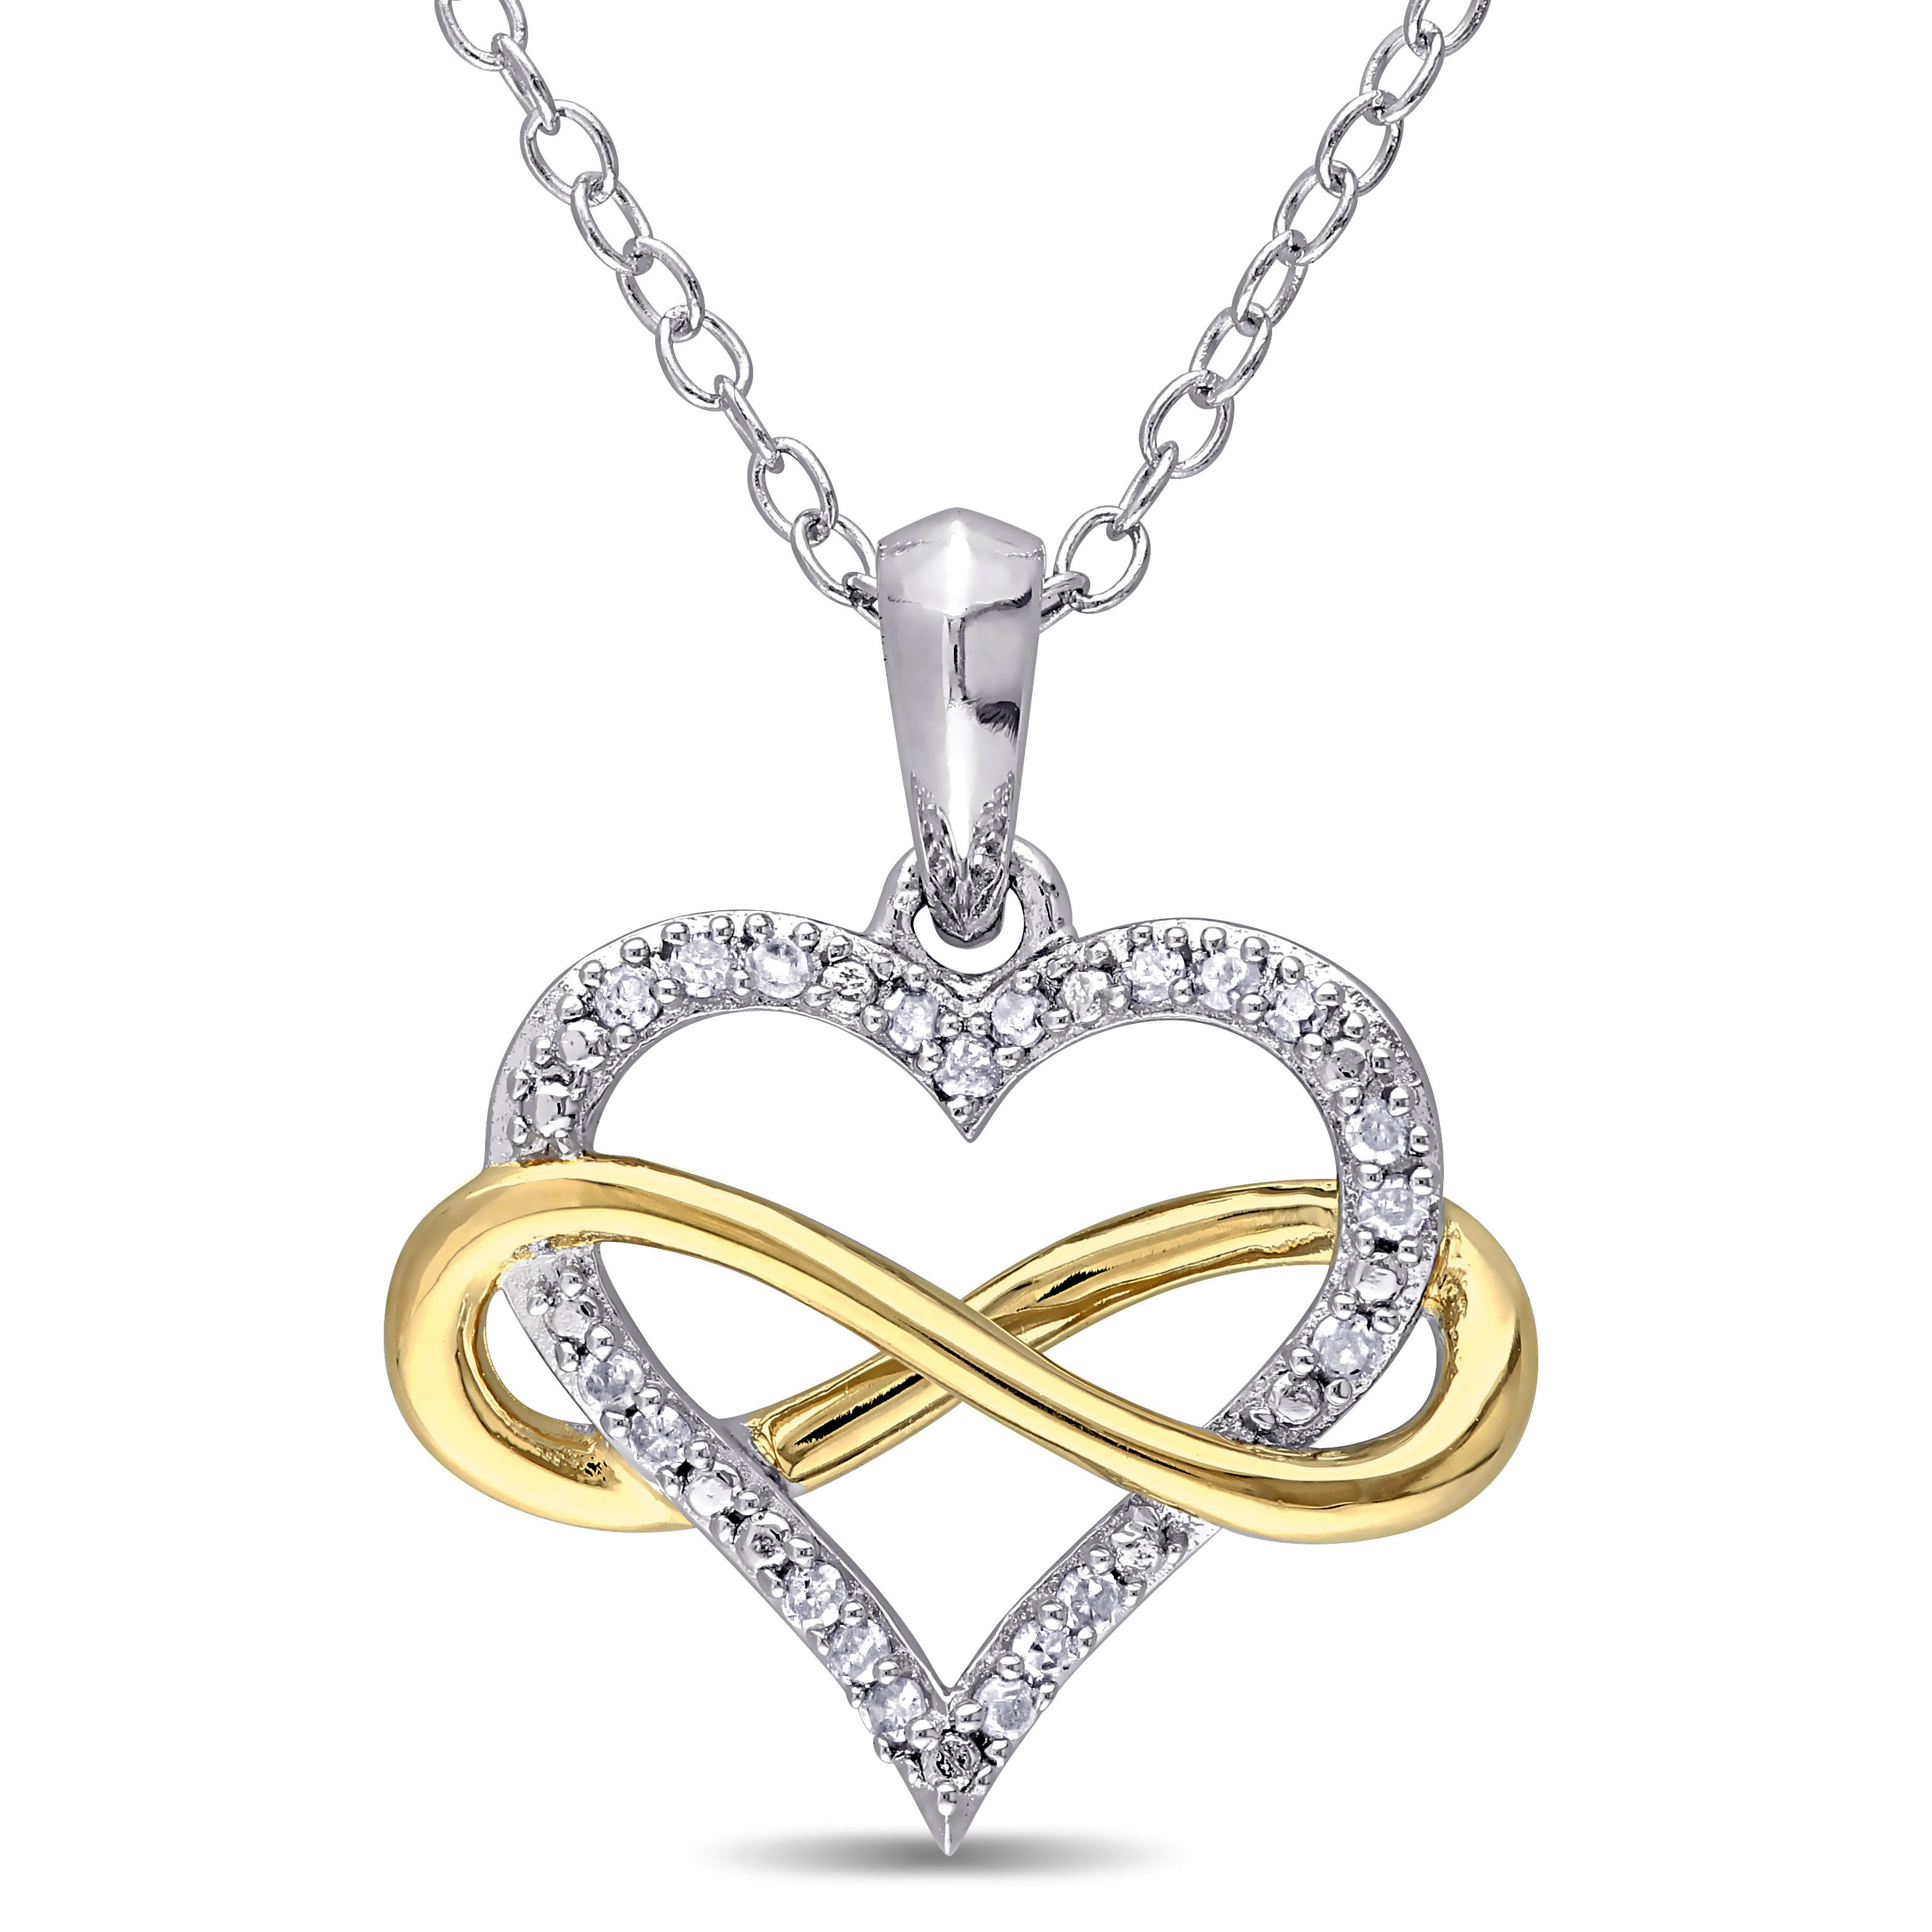 1/10 CT TW Diamond Infinity Heart Pendant with Chain in 2-Tone White and Yellow Sterling Silver - 18 in.